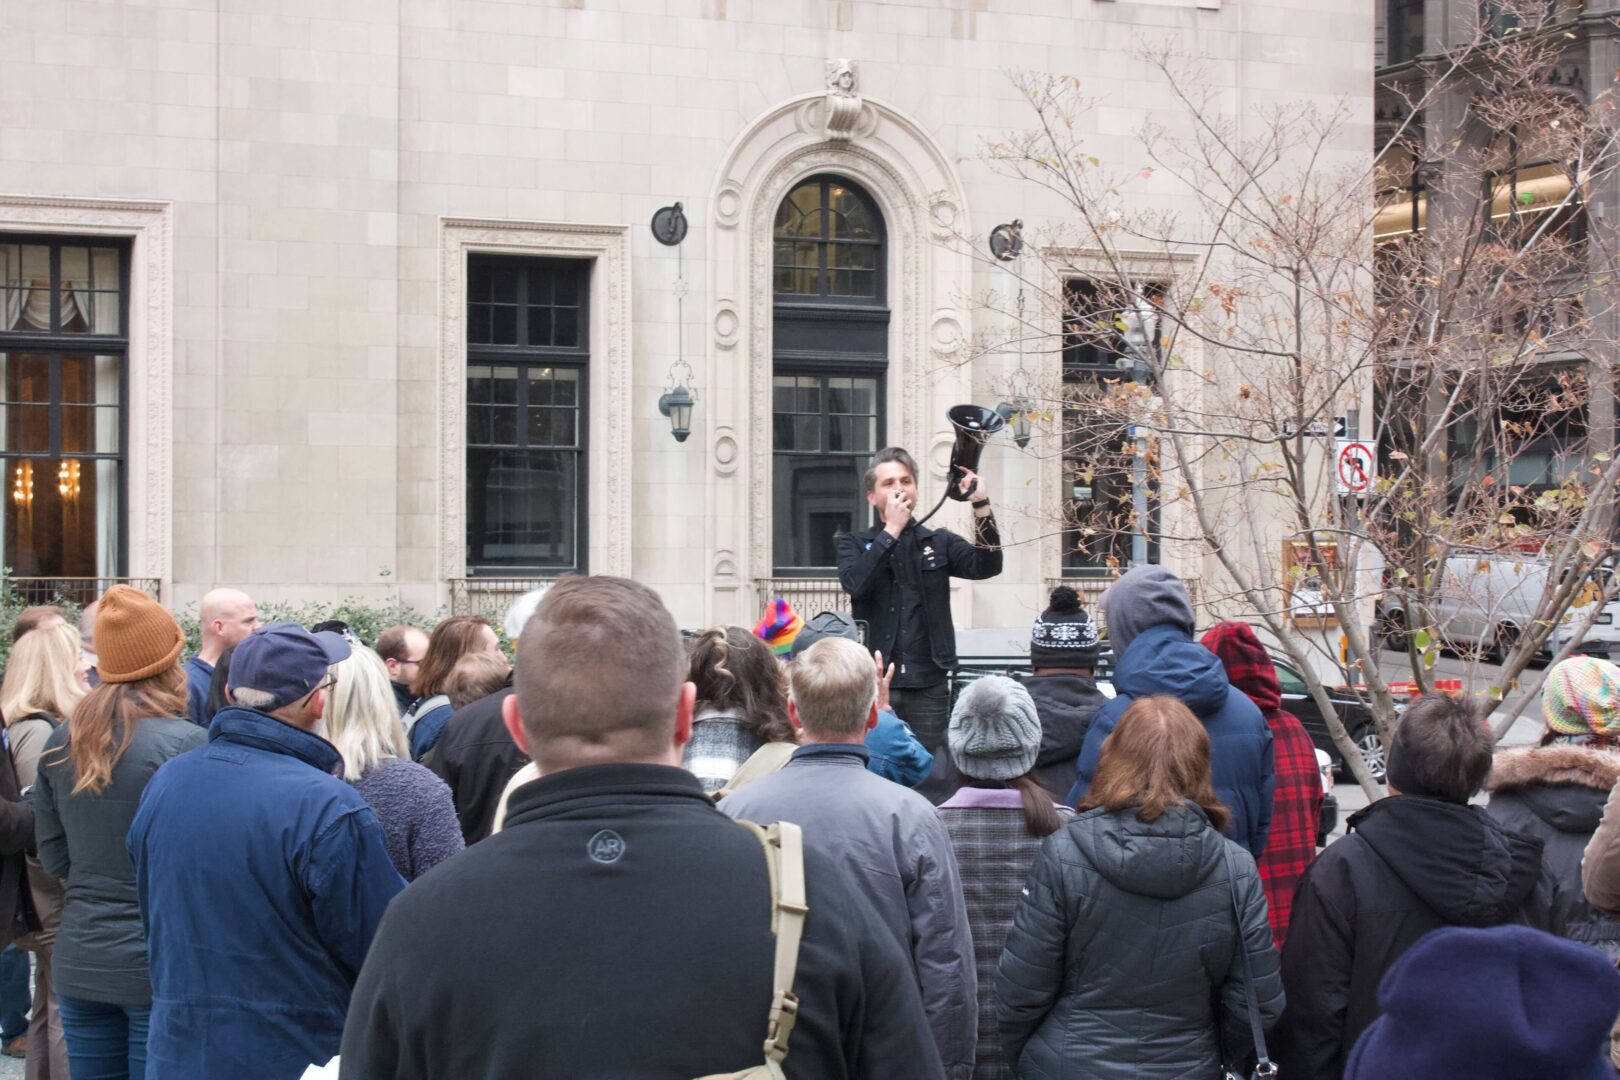 “We're not asking for the moon here,” said Zack Tanner, president of the News Guild of Pittsburgh, which represents striking workers at the Post-Gazette. He is one of several news guild members meeting with newspaper management Monday to negotiate a new union contract.